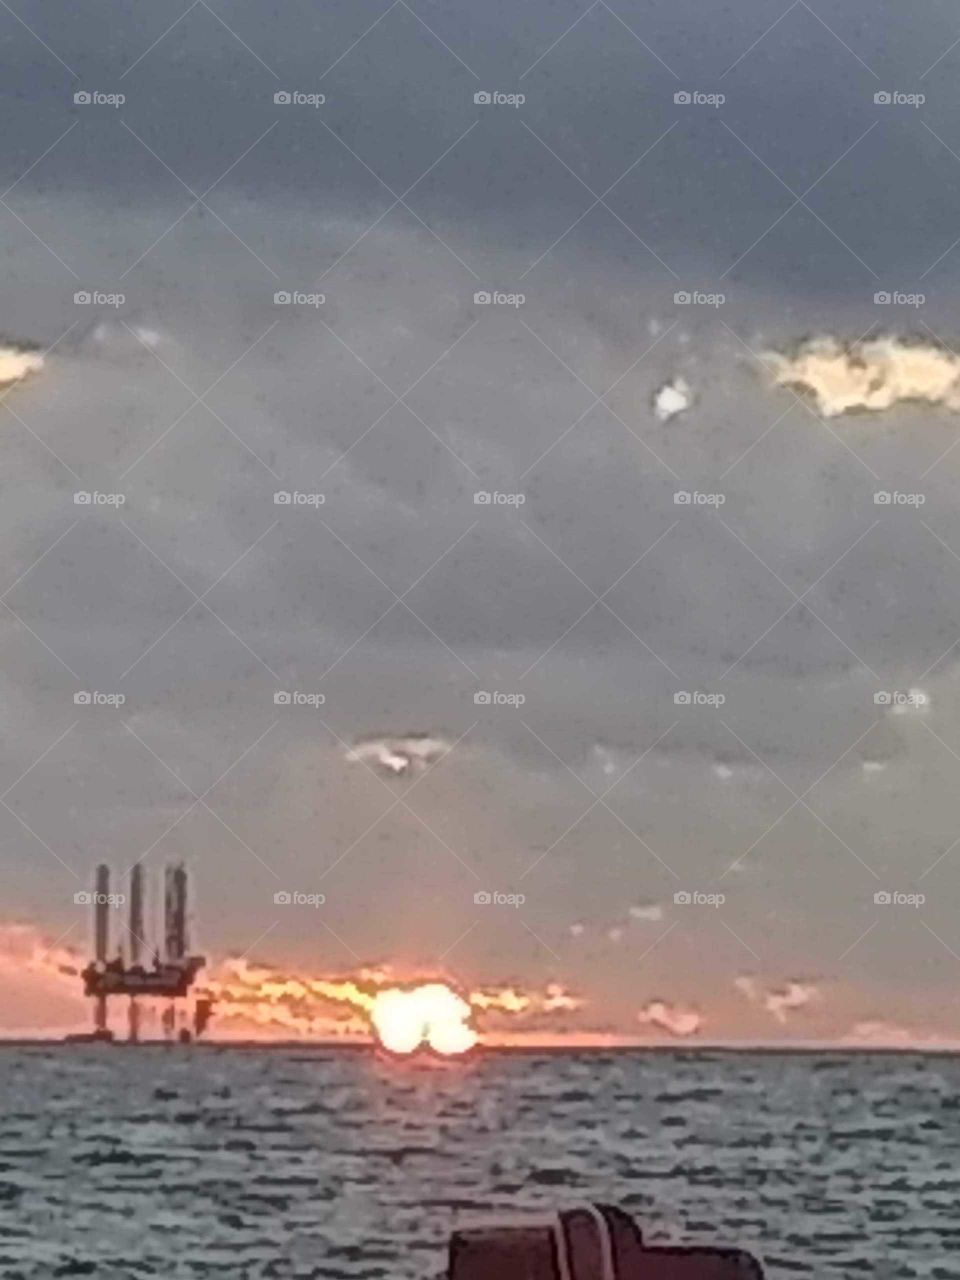 offshore drilling rig in the gulf of Mexico